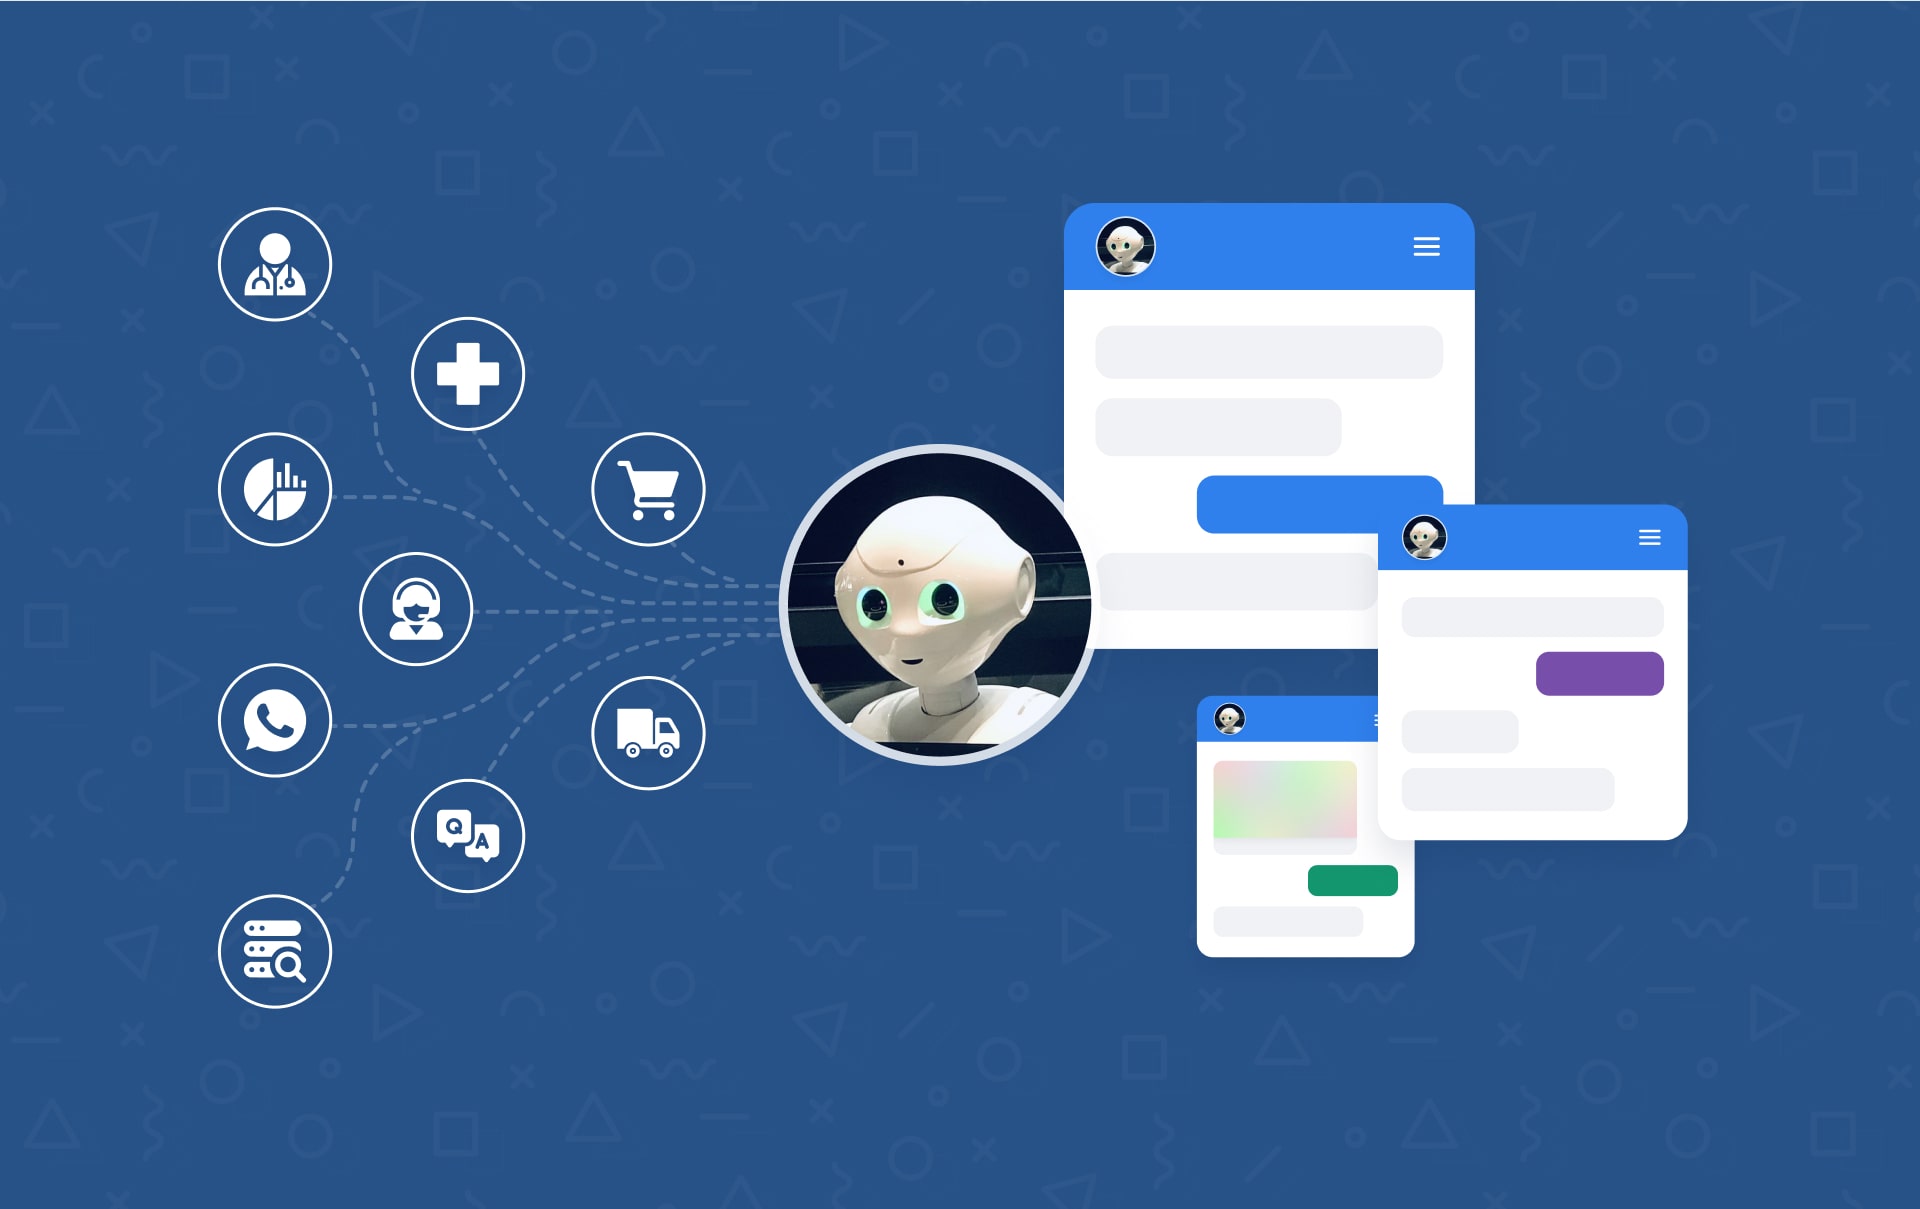 How Do Chatbots Work?